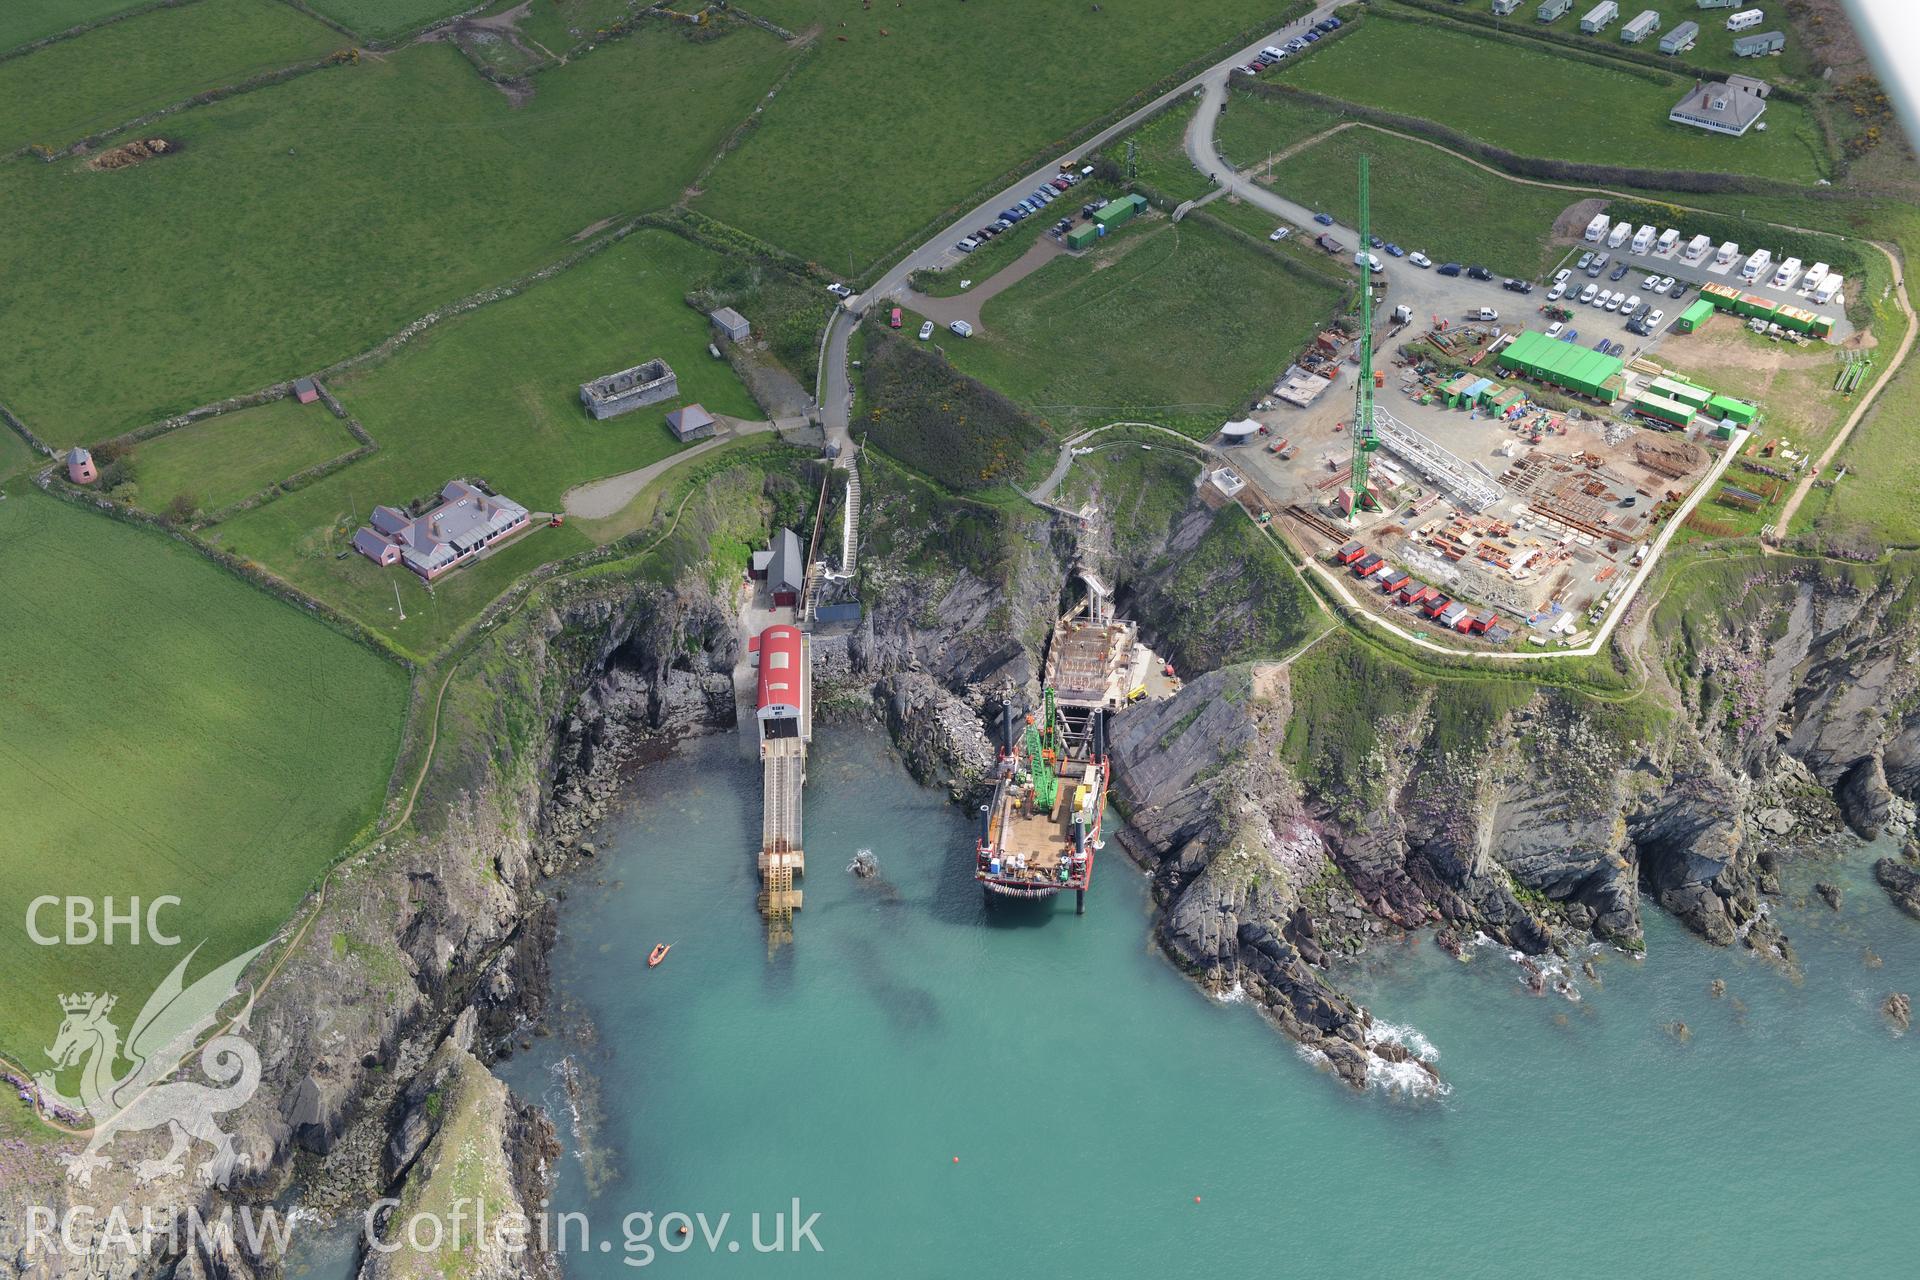 St Justinian's Chapel, St Justinian's bungalow, and St. David's old lifeboat station with the new station under construction. The floating mooring used by the crew whilst the station was being built is also visible. Oblique aerial photograph taken during the Royal Commission's programme of archaeological aerial reconnaissance by Toby Driver on 13th May 2015.